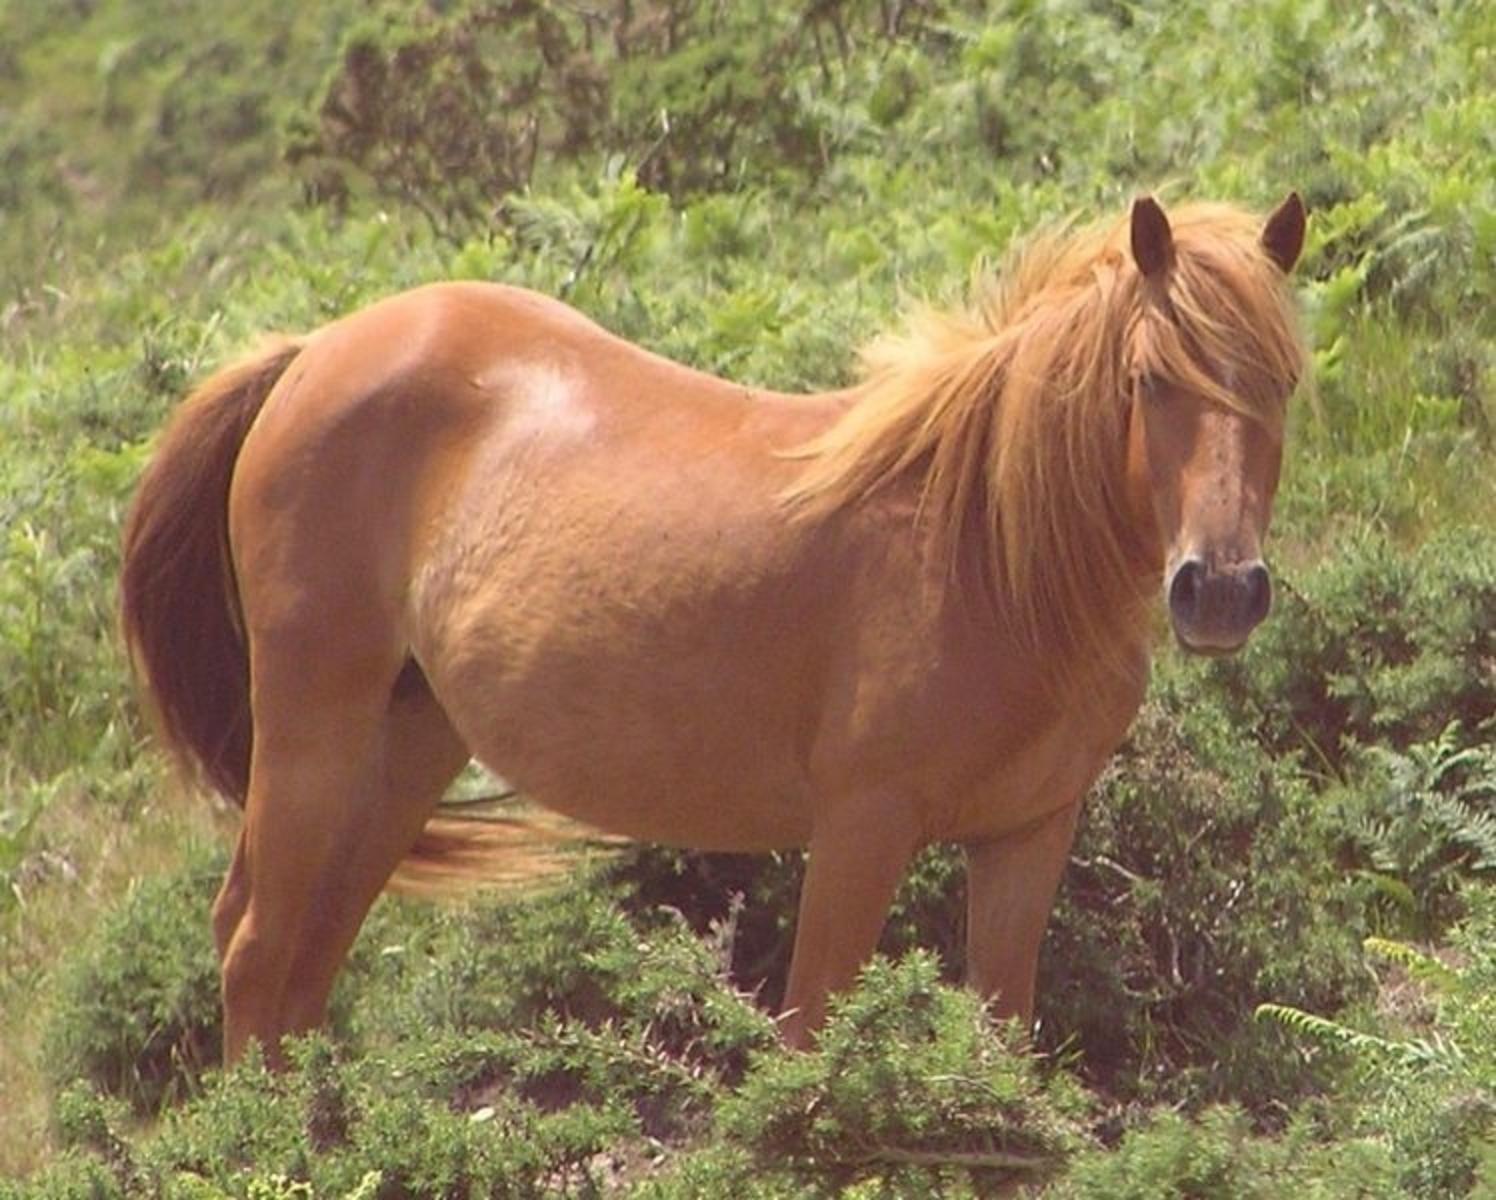 The sorrel horse is known as the chestnut to some. Photo courtesy Wikipedia